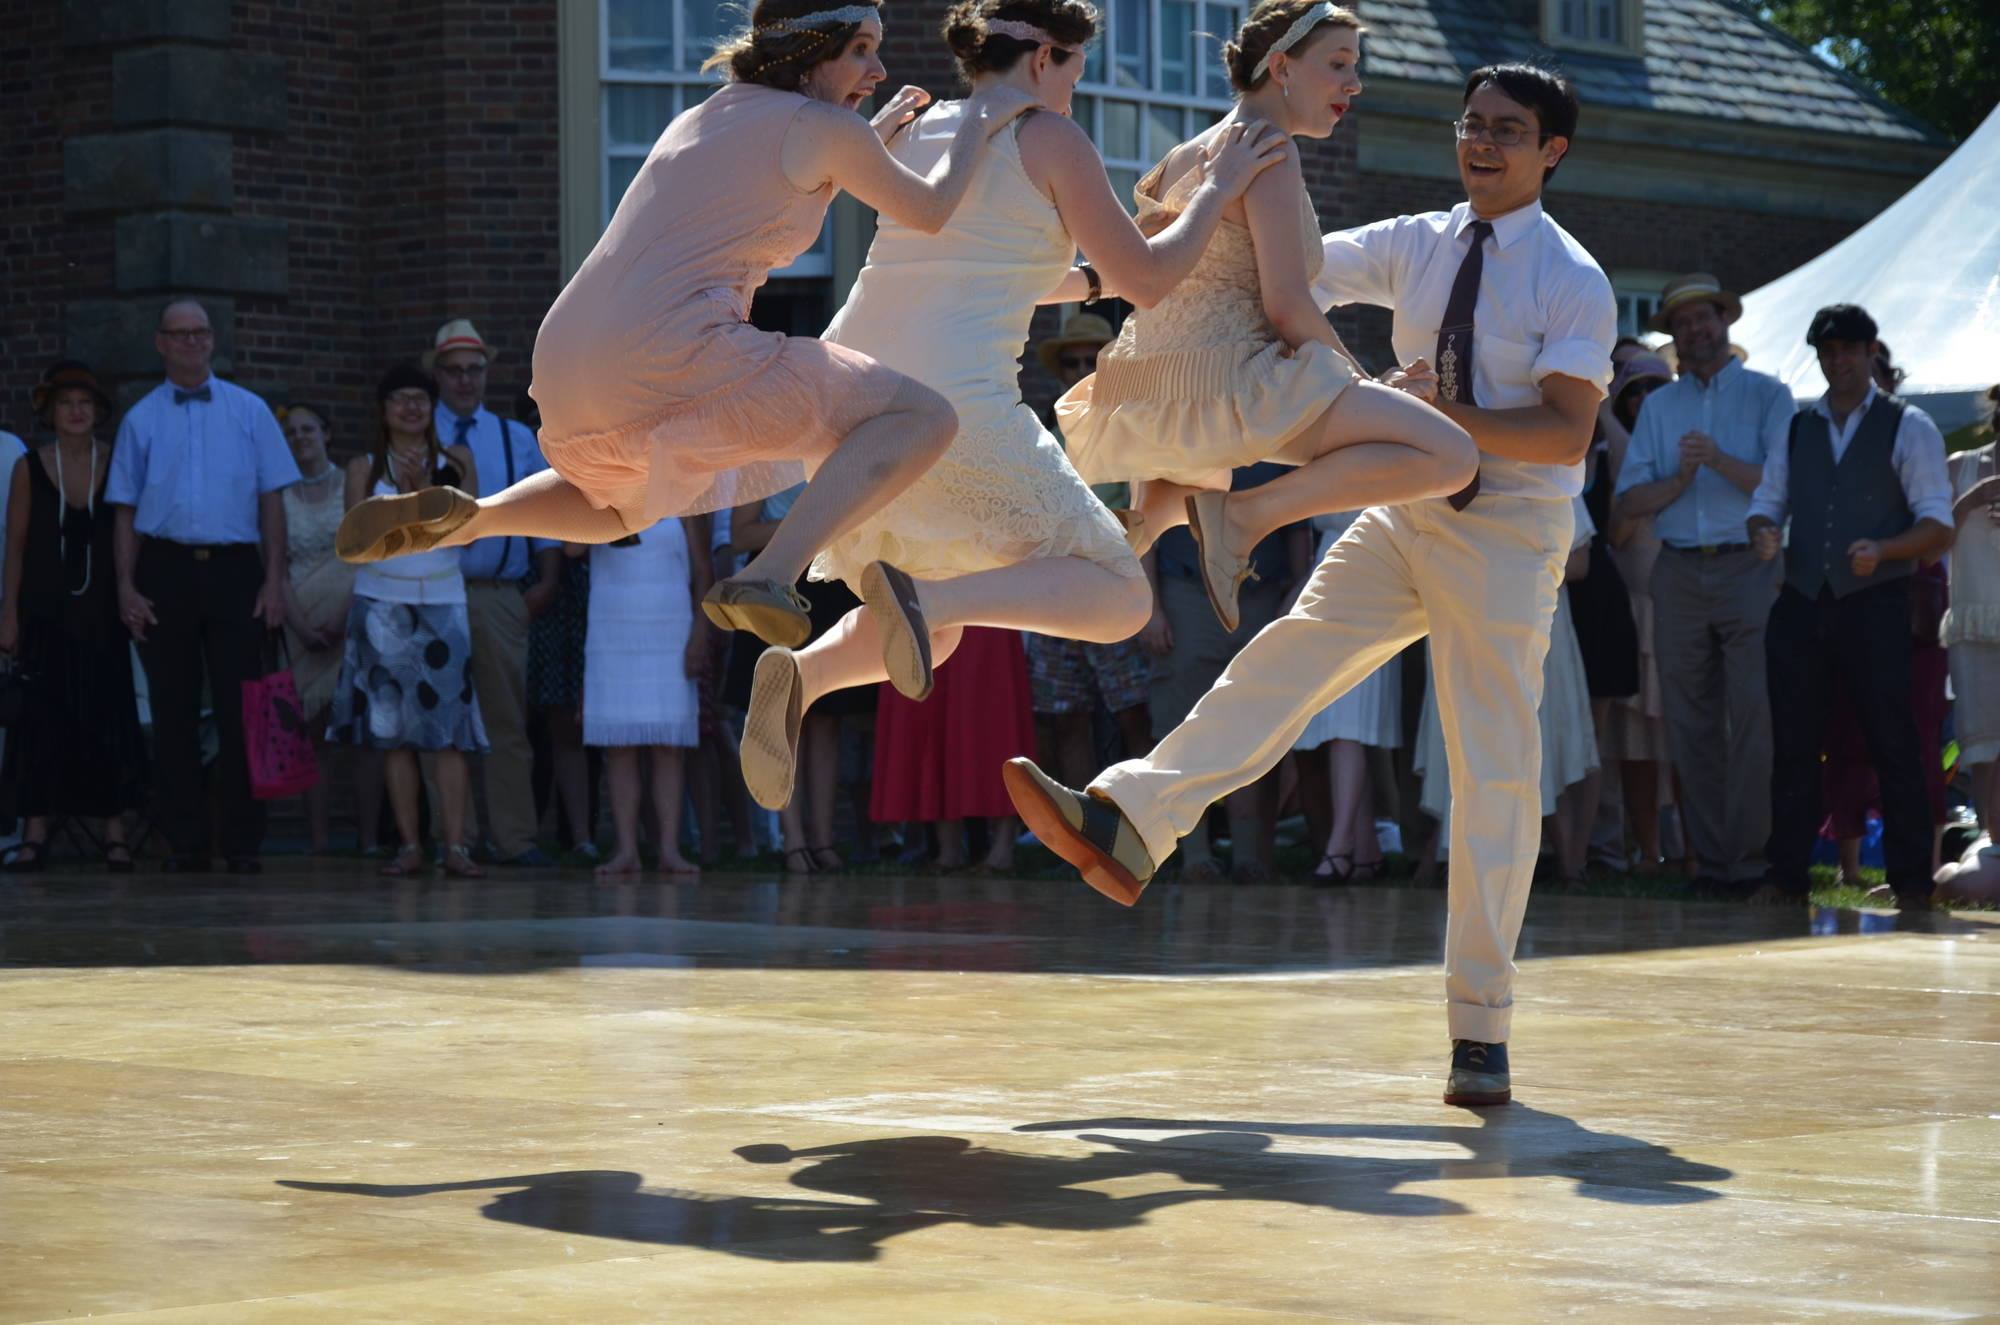 Boston Lindy Hop Dancers swing dance performing at Roaring 20's Lawn Party